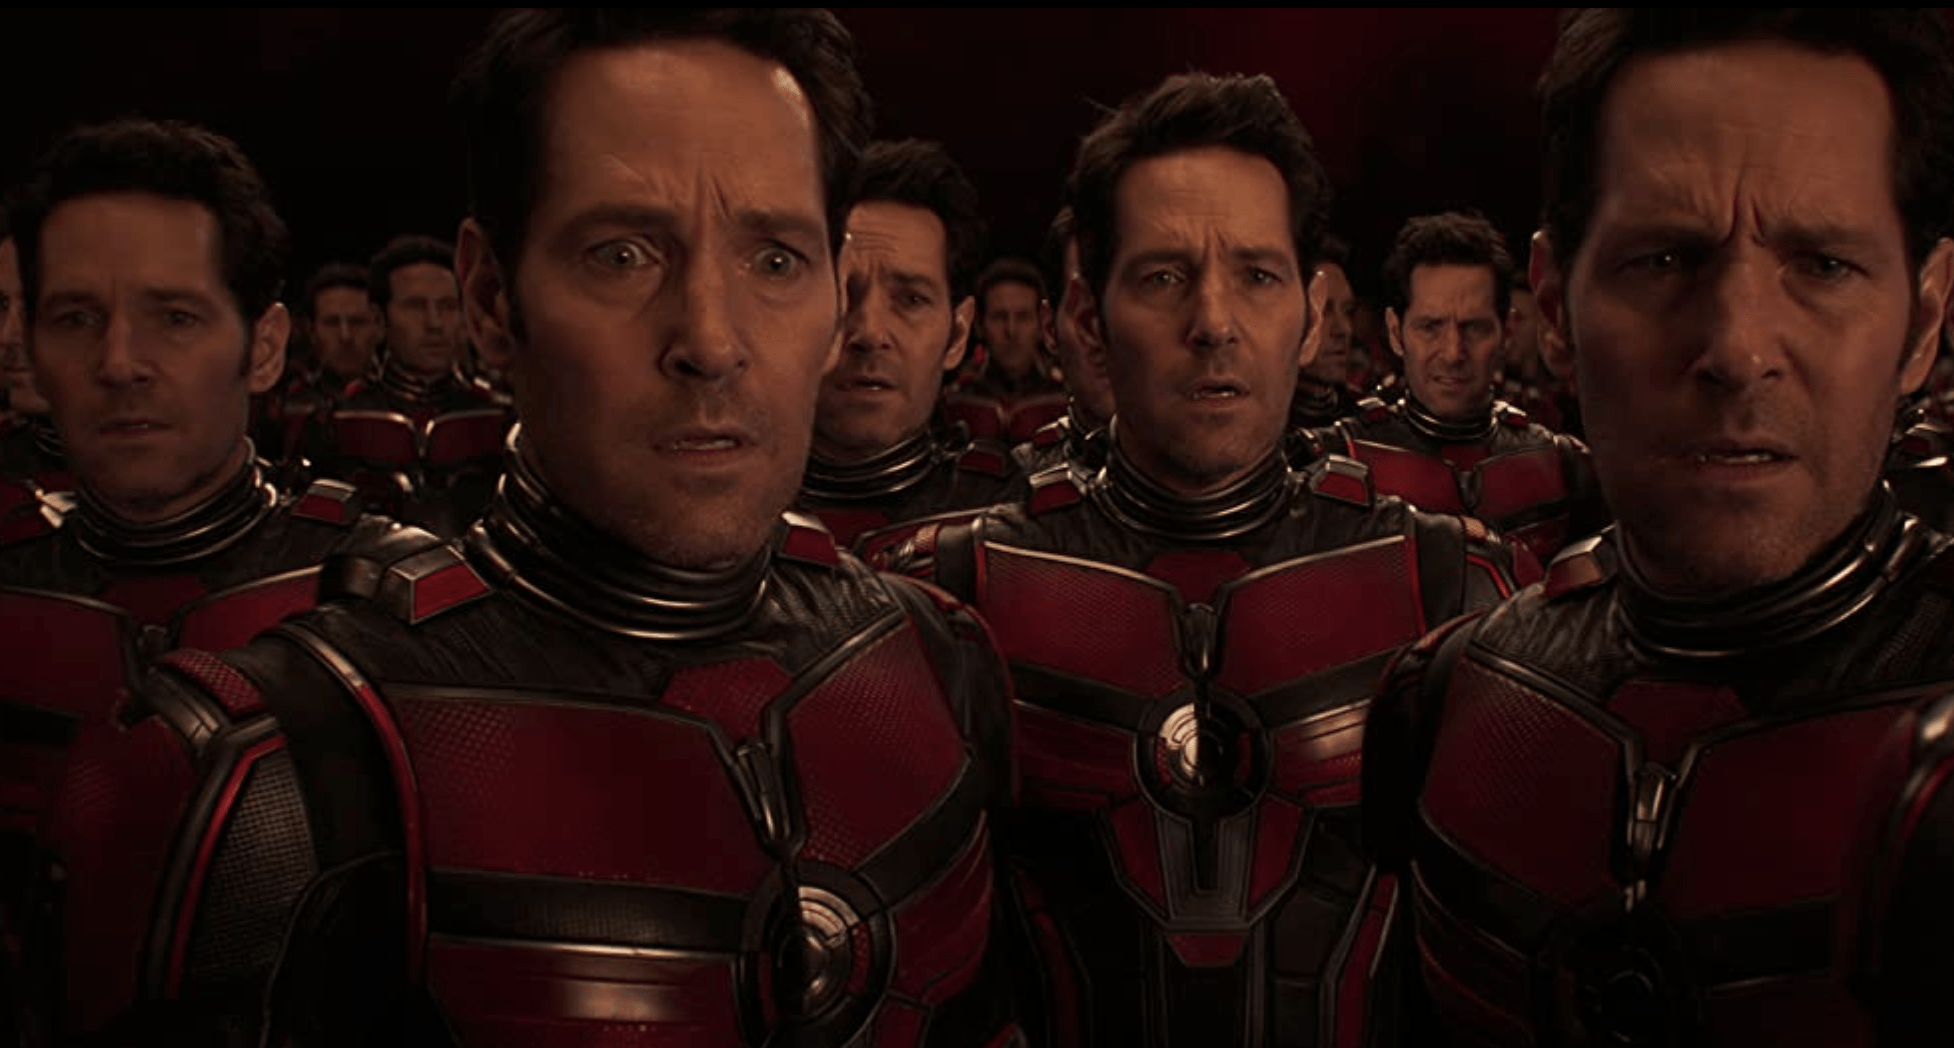 Paul Rudd says third Ant-Man film will 'set the tone' for Marvel's